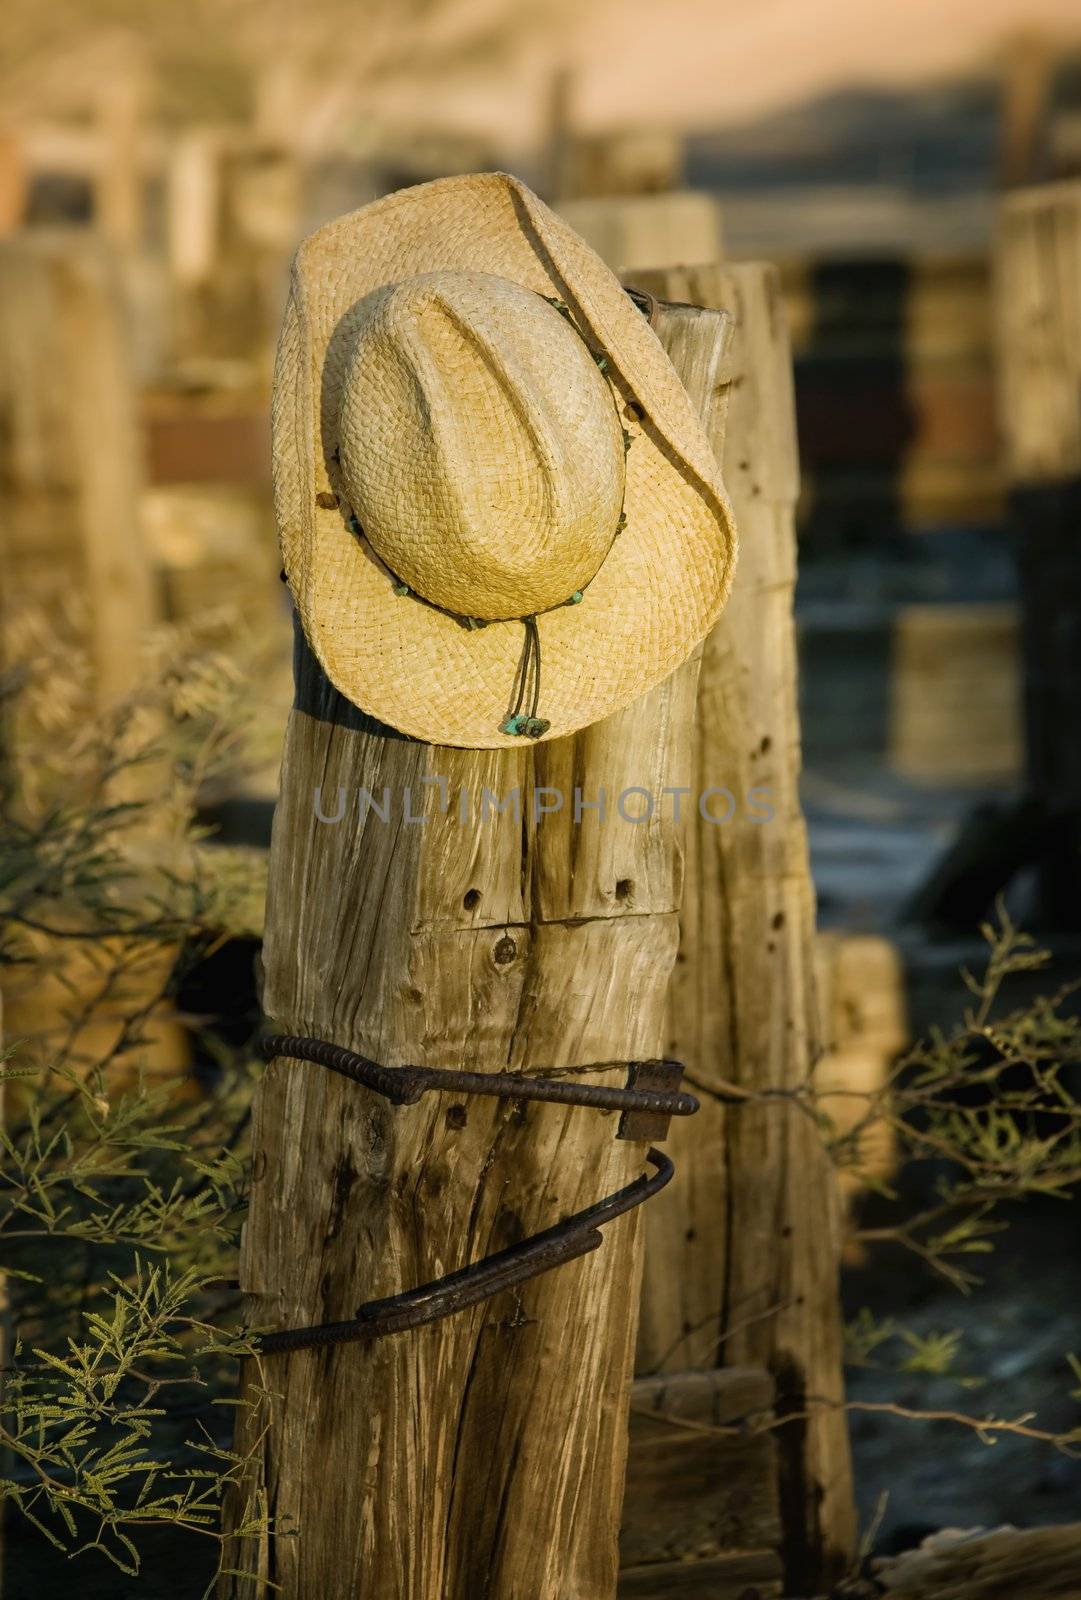 Straw cowboy hat hanging on an old wooden post.